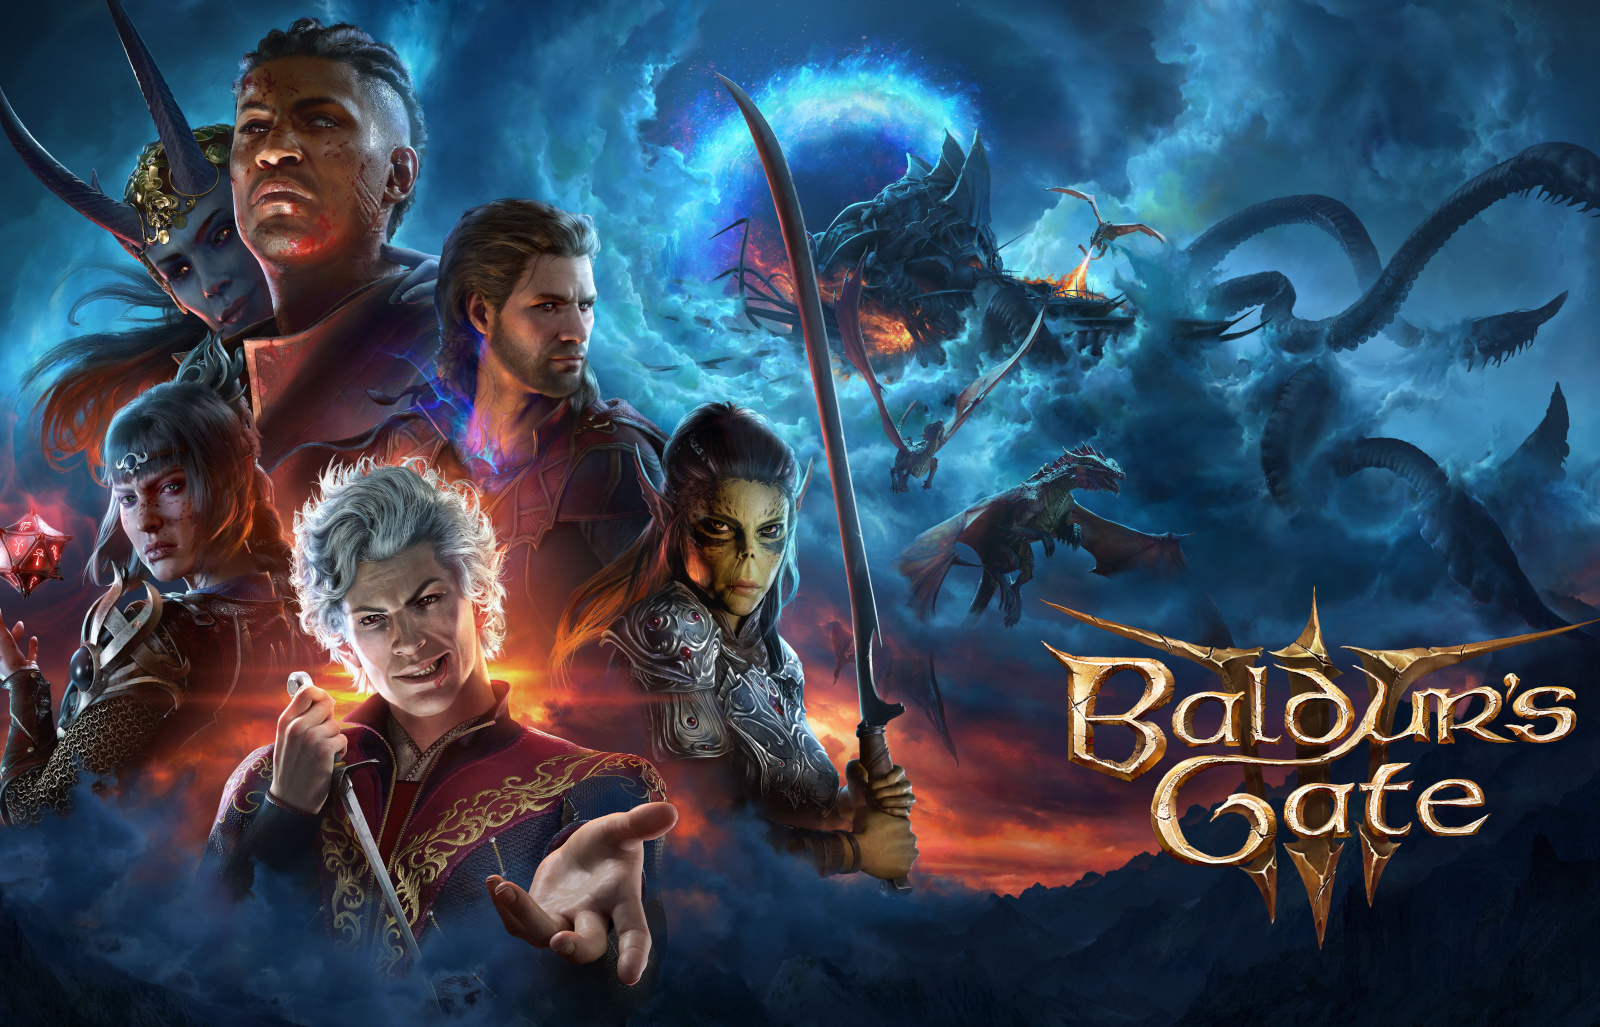 Baldur's Gate III will be fully available for Mac users on September 21